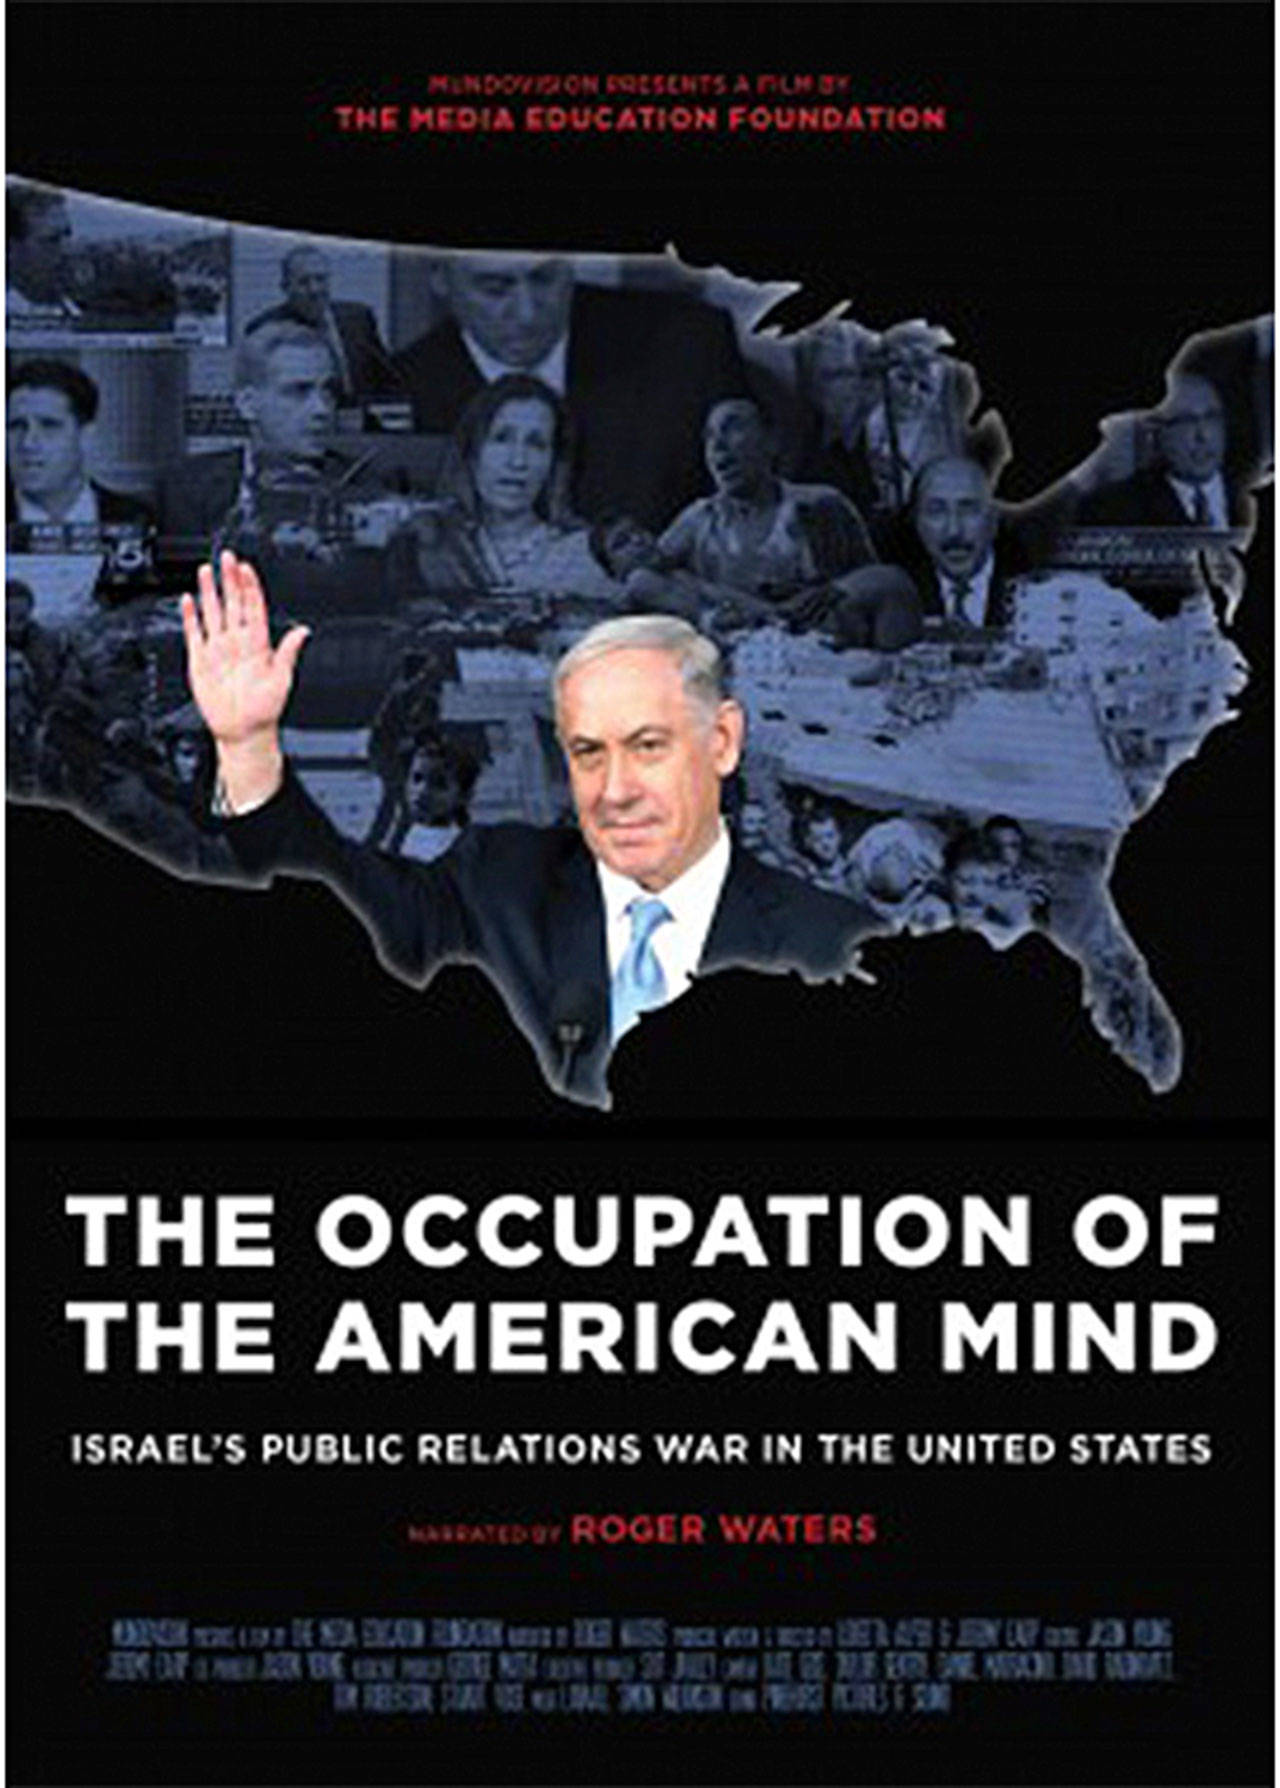 Image courtesy of Free Range Films | Free Range Films will host a screening of “Occupation of the American Mind,” a documentary that “exposes Israel’s public relations war against the Palestinians in the United States,” at 7 p.m. Friday, Feb. 9 at the Suquamish Church of Christ.